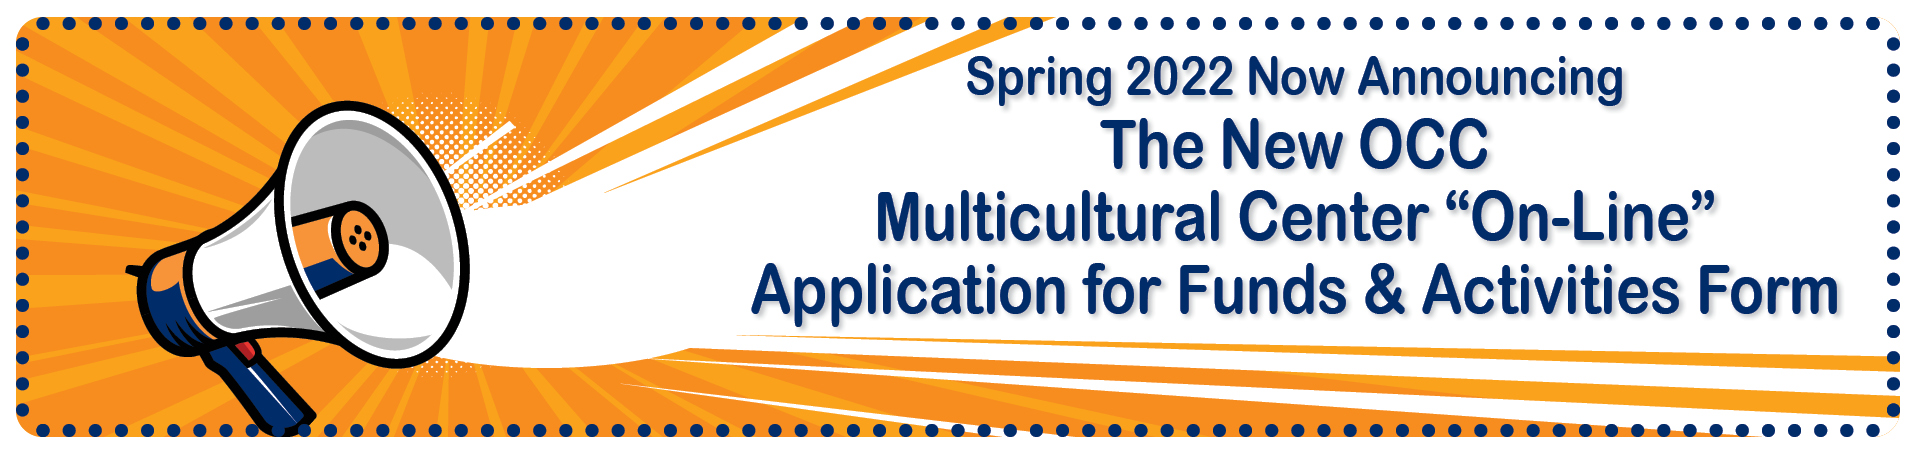 Spring 22 Announcing New OCC Multicultural Center "On-Line" Application for Funds & Activities Form